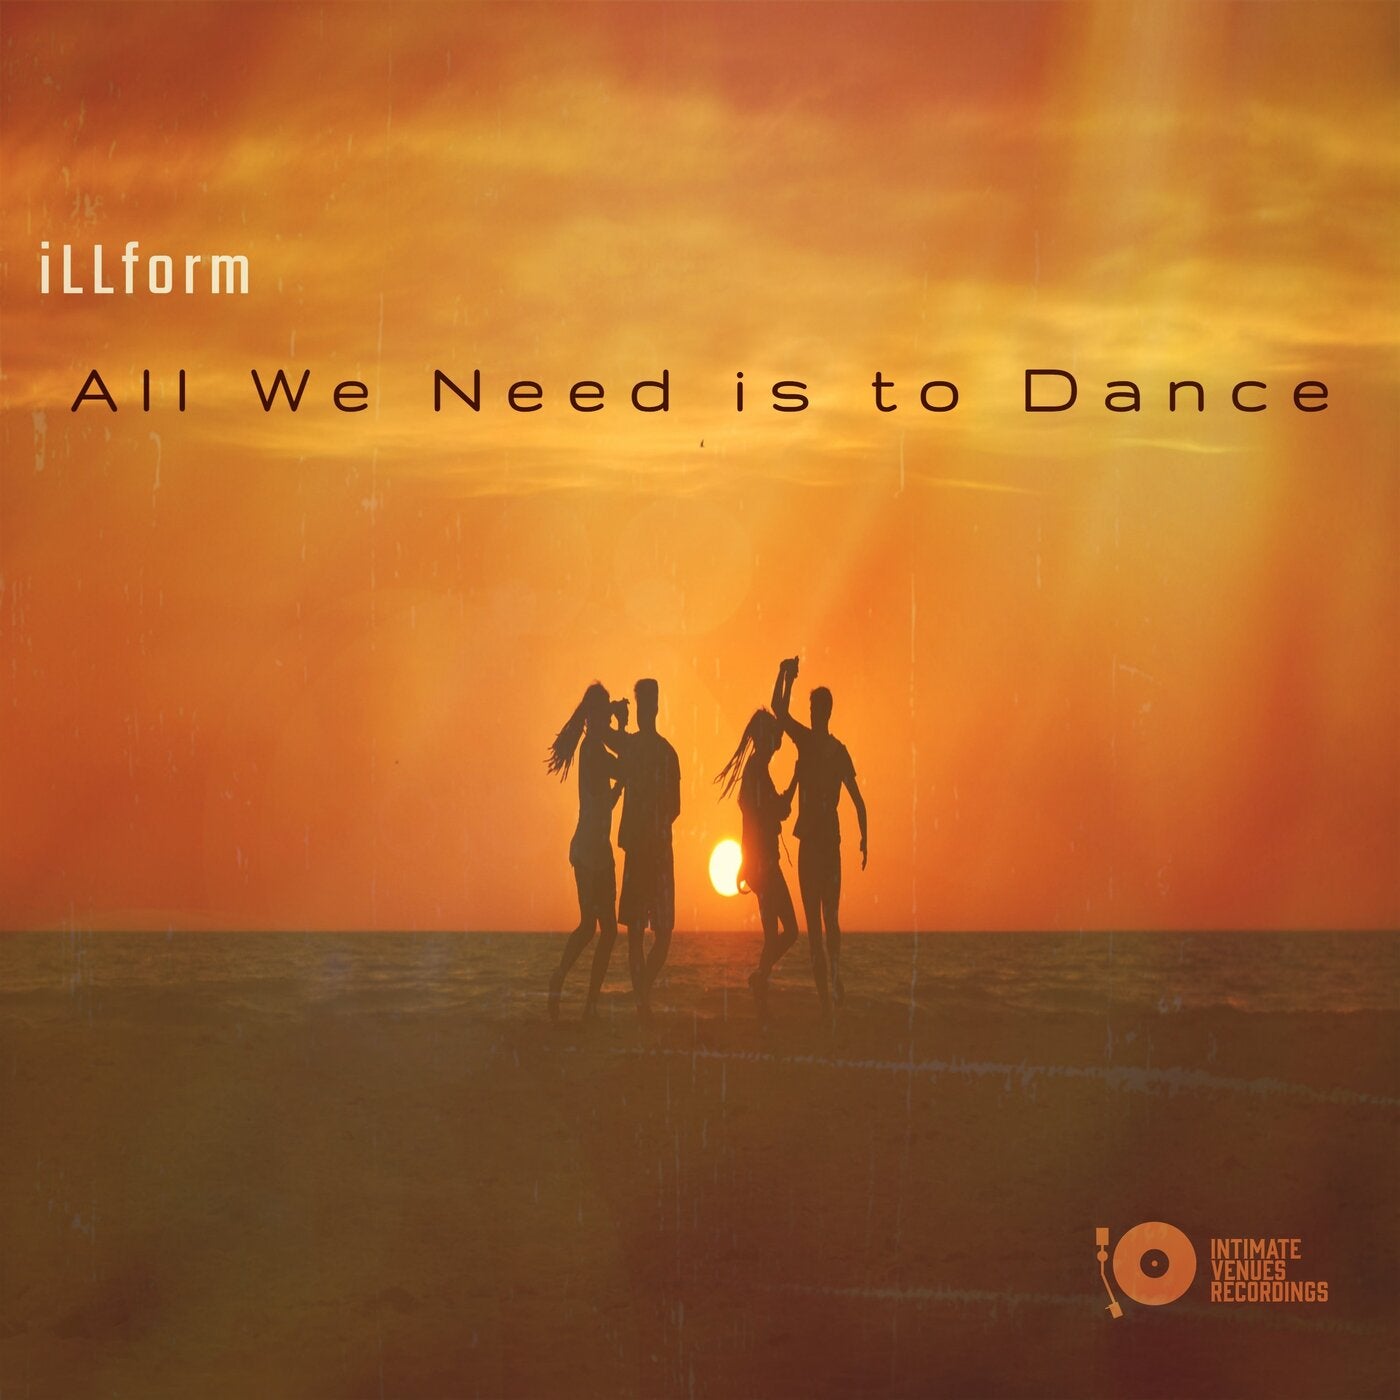 All We Need is to Dance